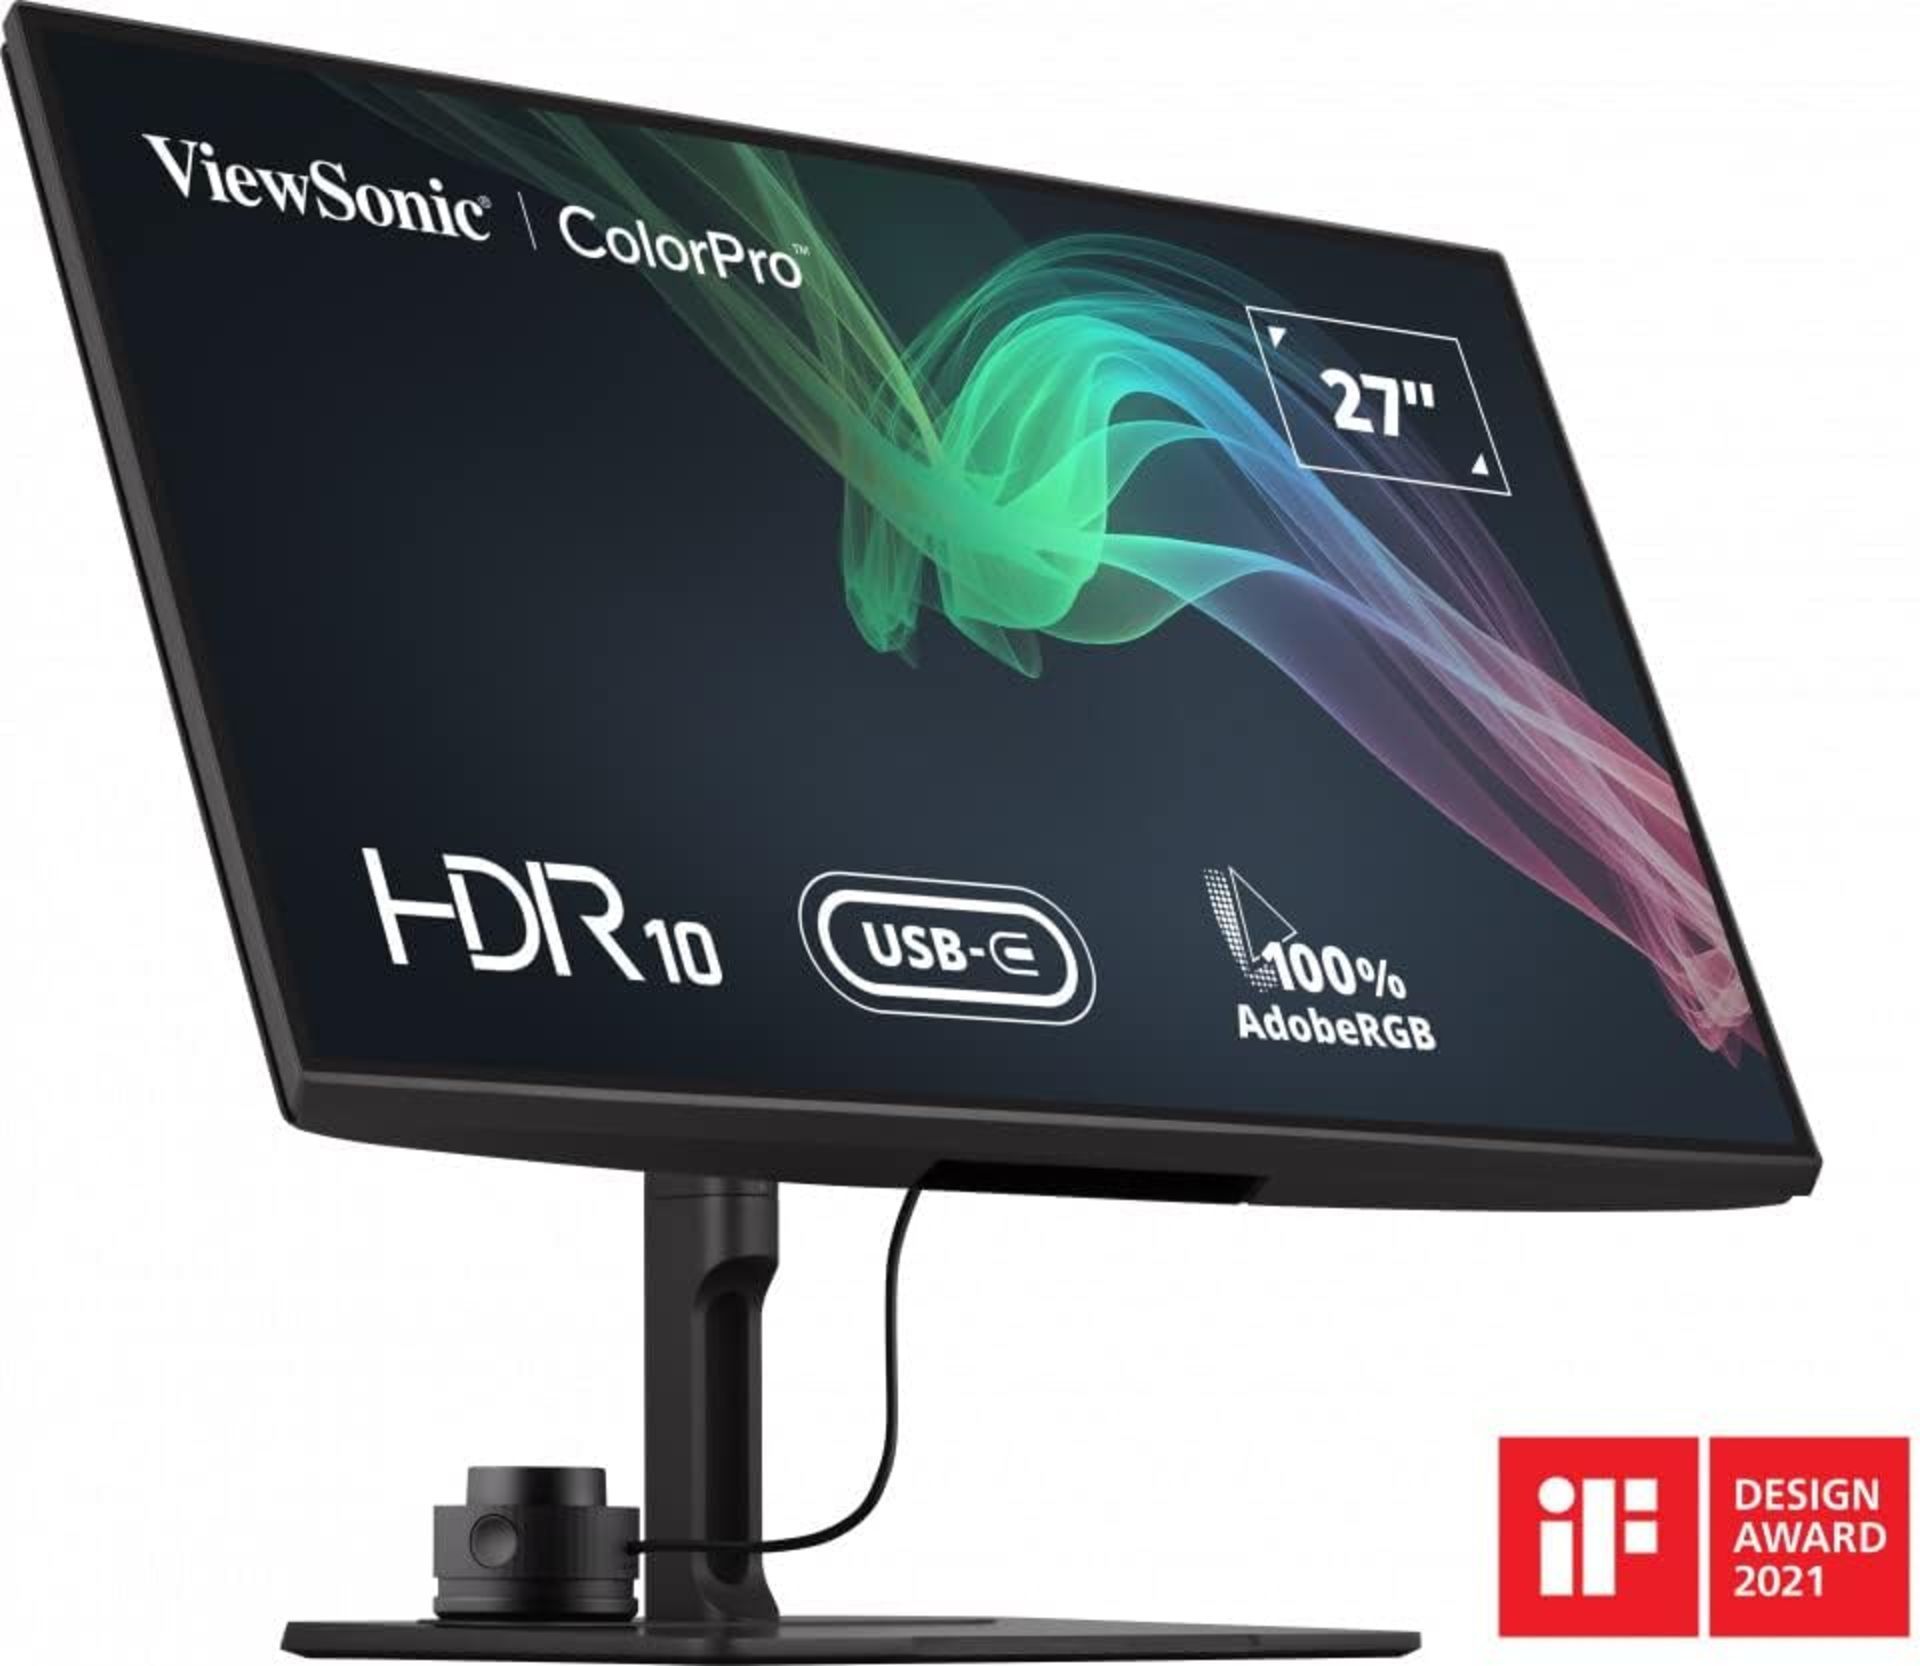 BRAND NEW FACTORY SEALED VIEWSONIC VP2786-4K ColorPro 27-inch IPS 4K UHD Monitor. RRP £1028. (PCK4). - Image 4 of 7